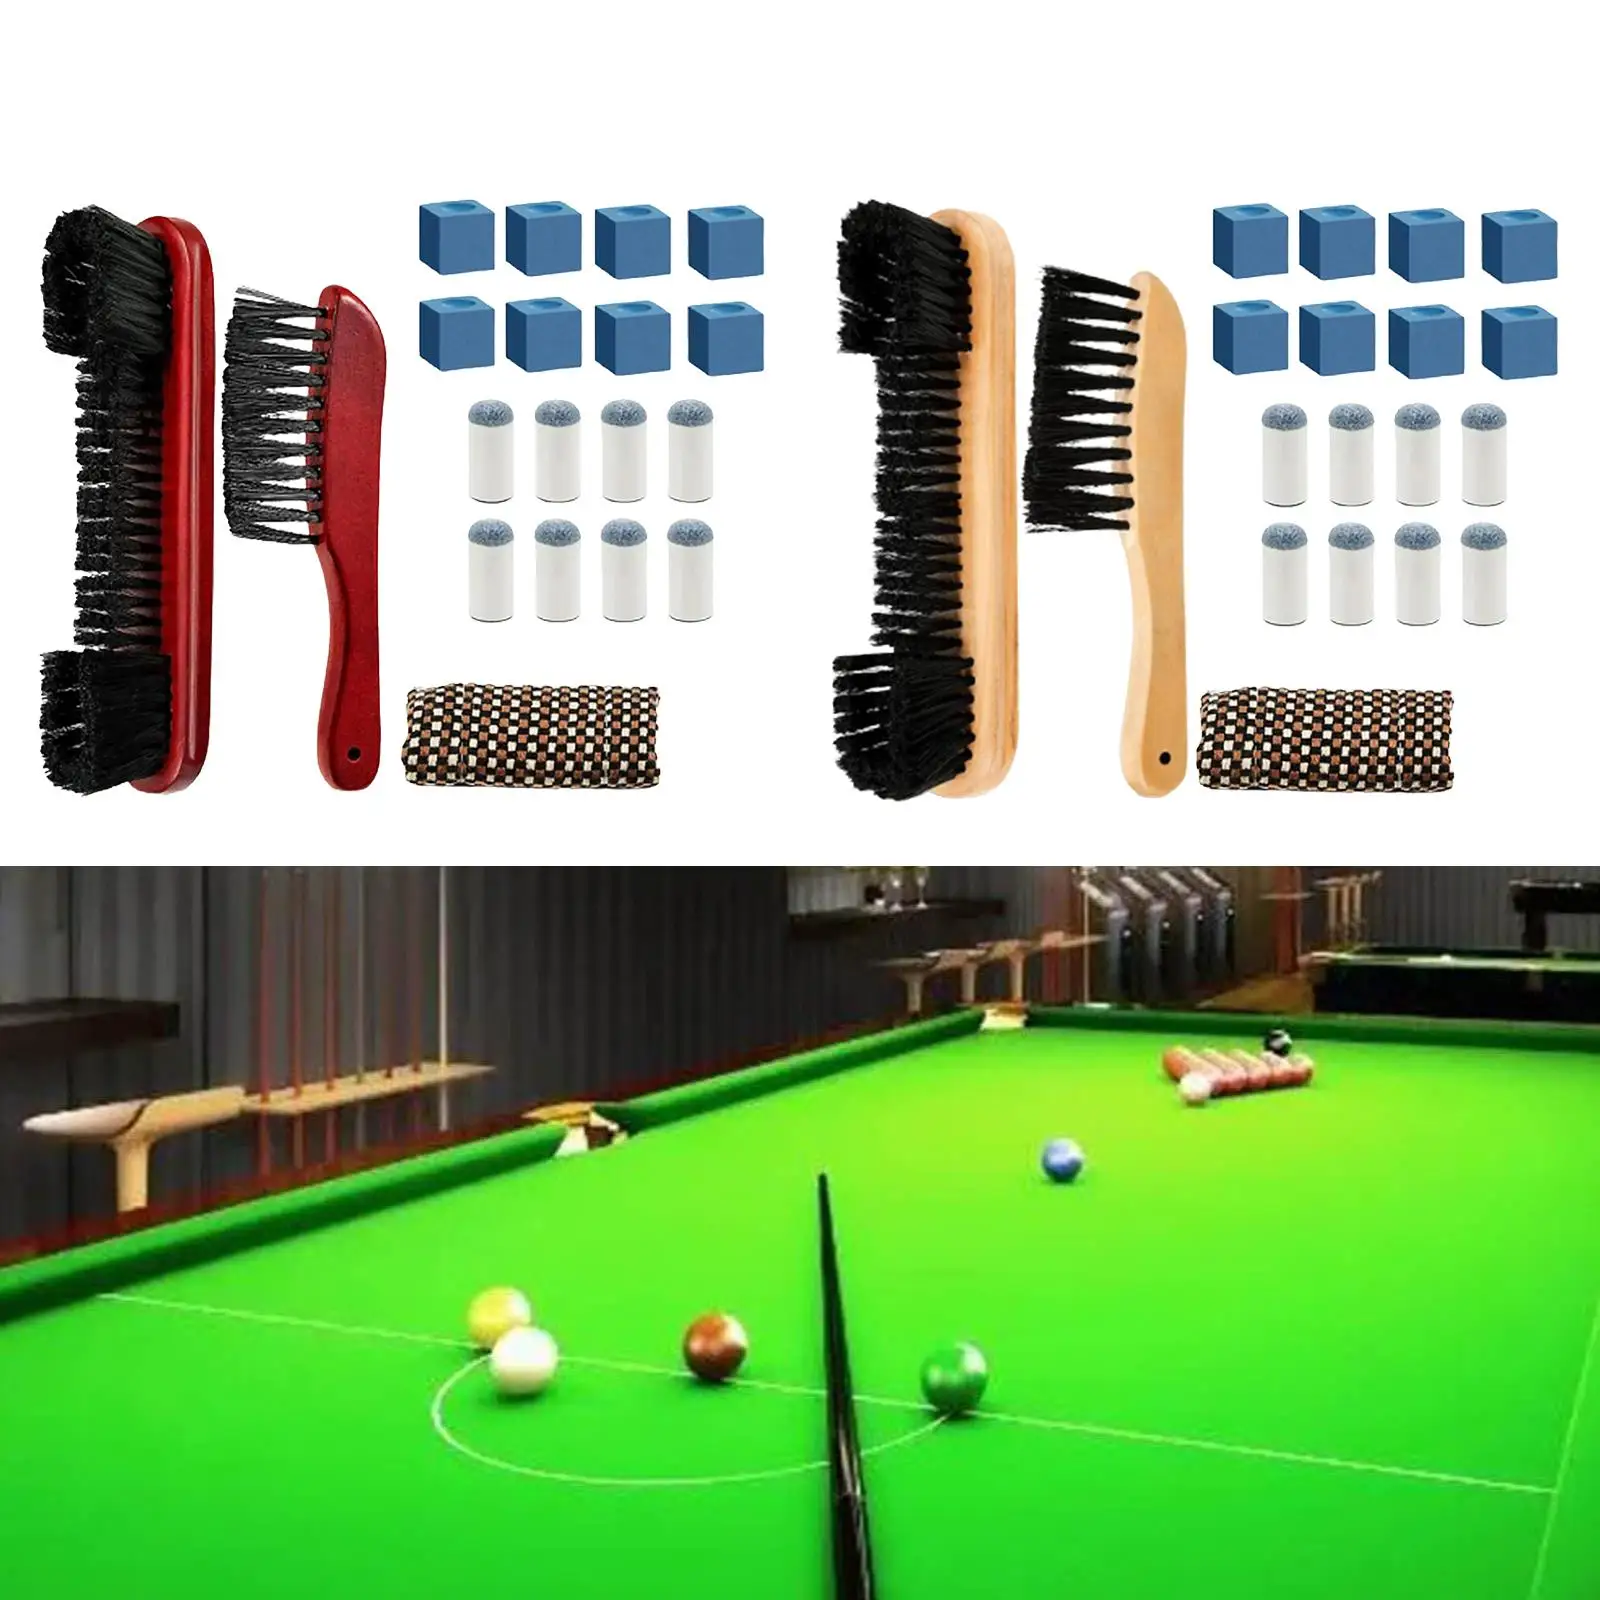 Billiards Pool Table Brush Set Cleaning Tool Cue Tips Replacements